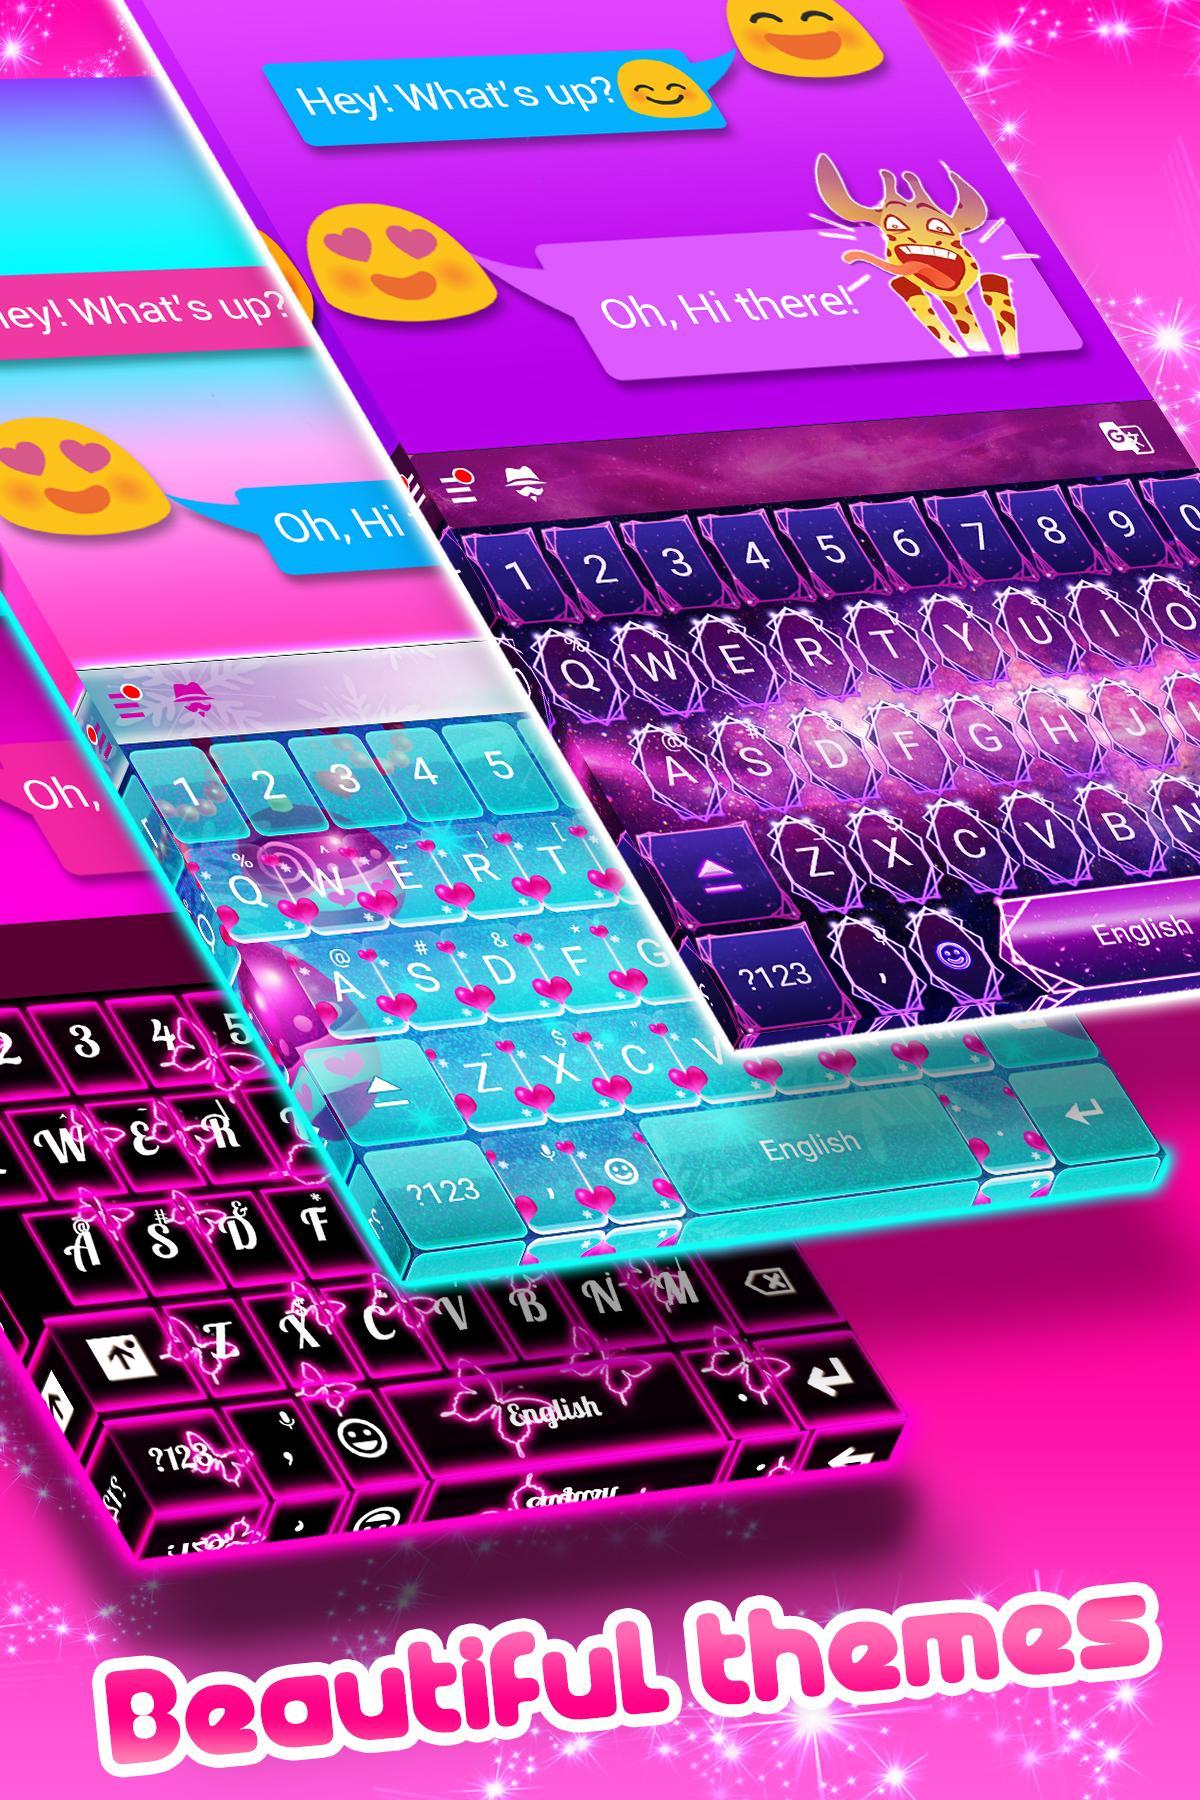 2022 Keyboard for Android - APK Download